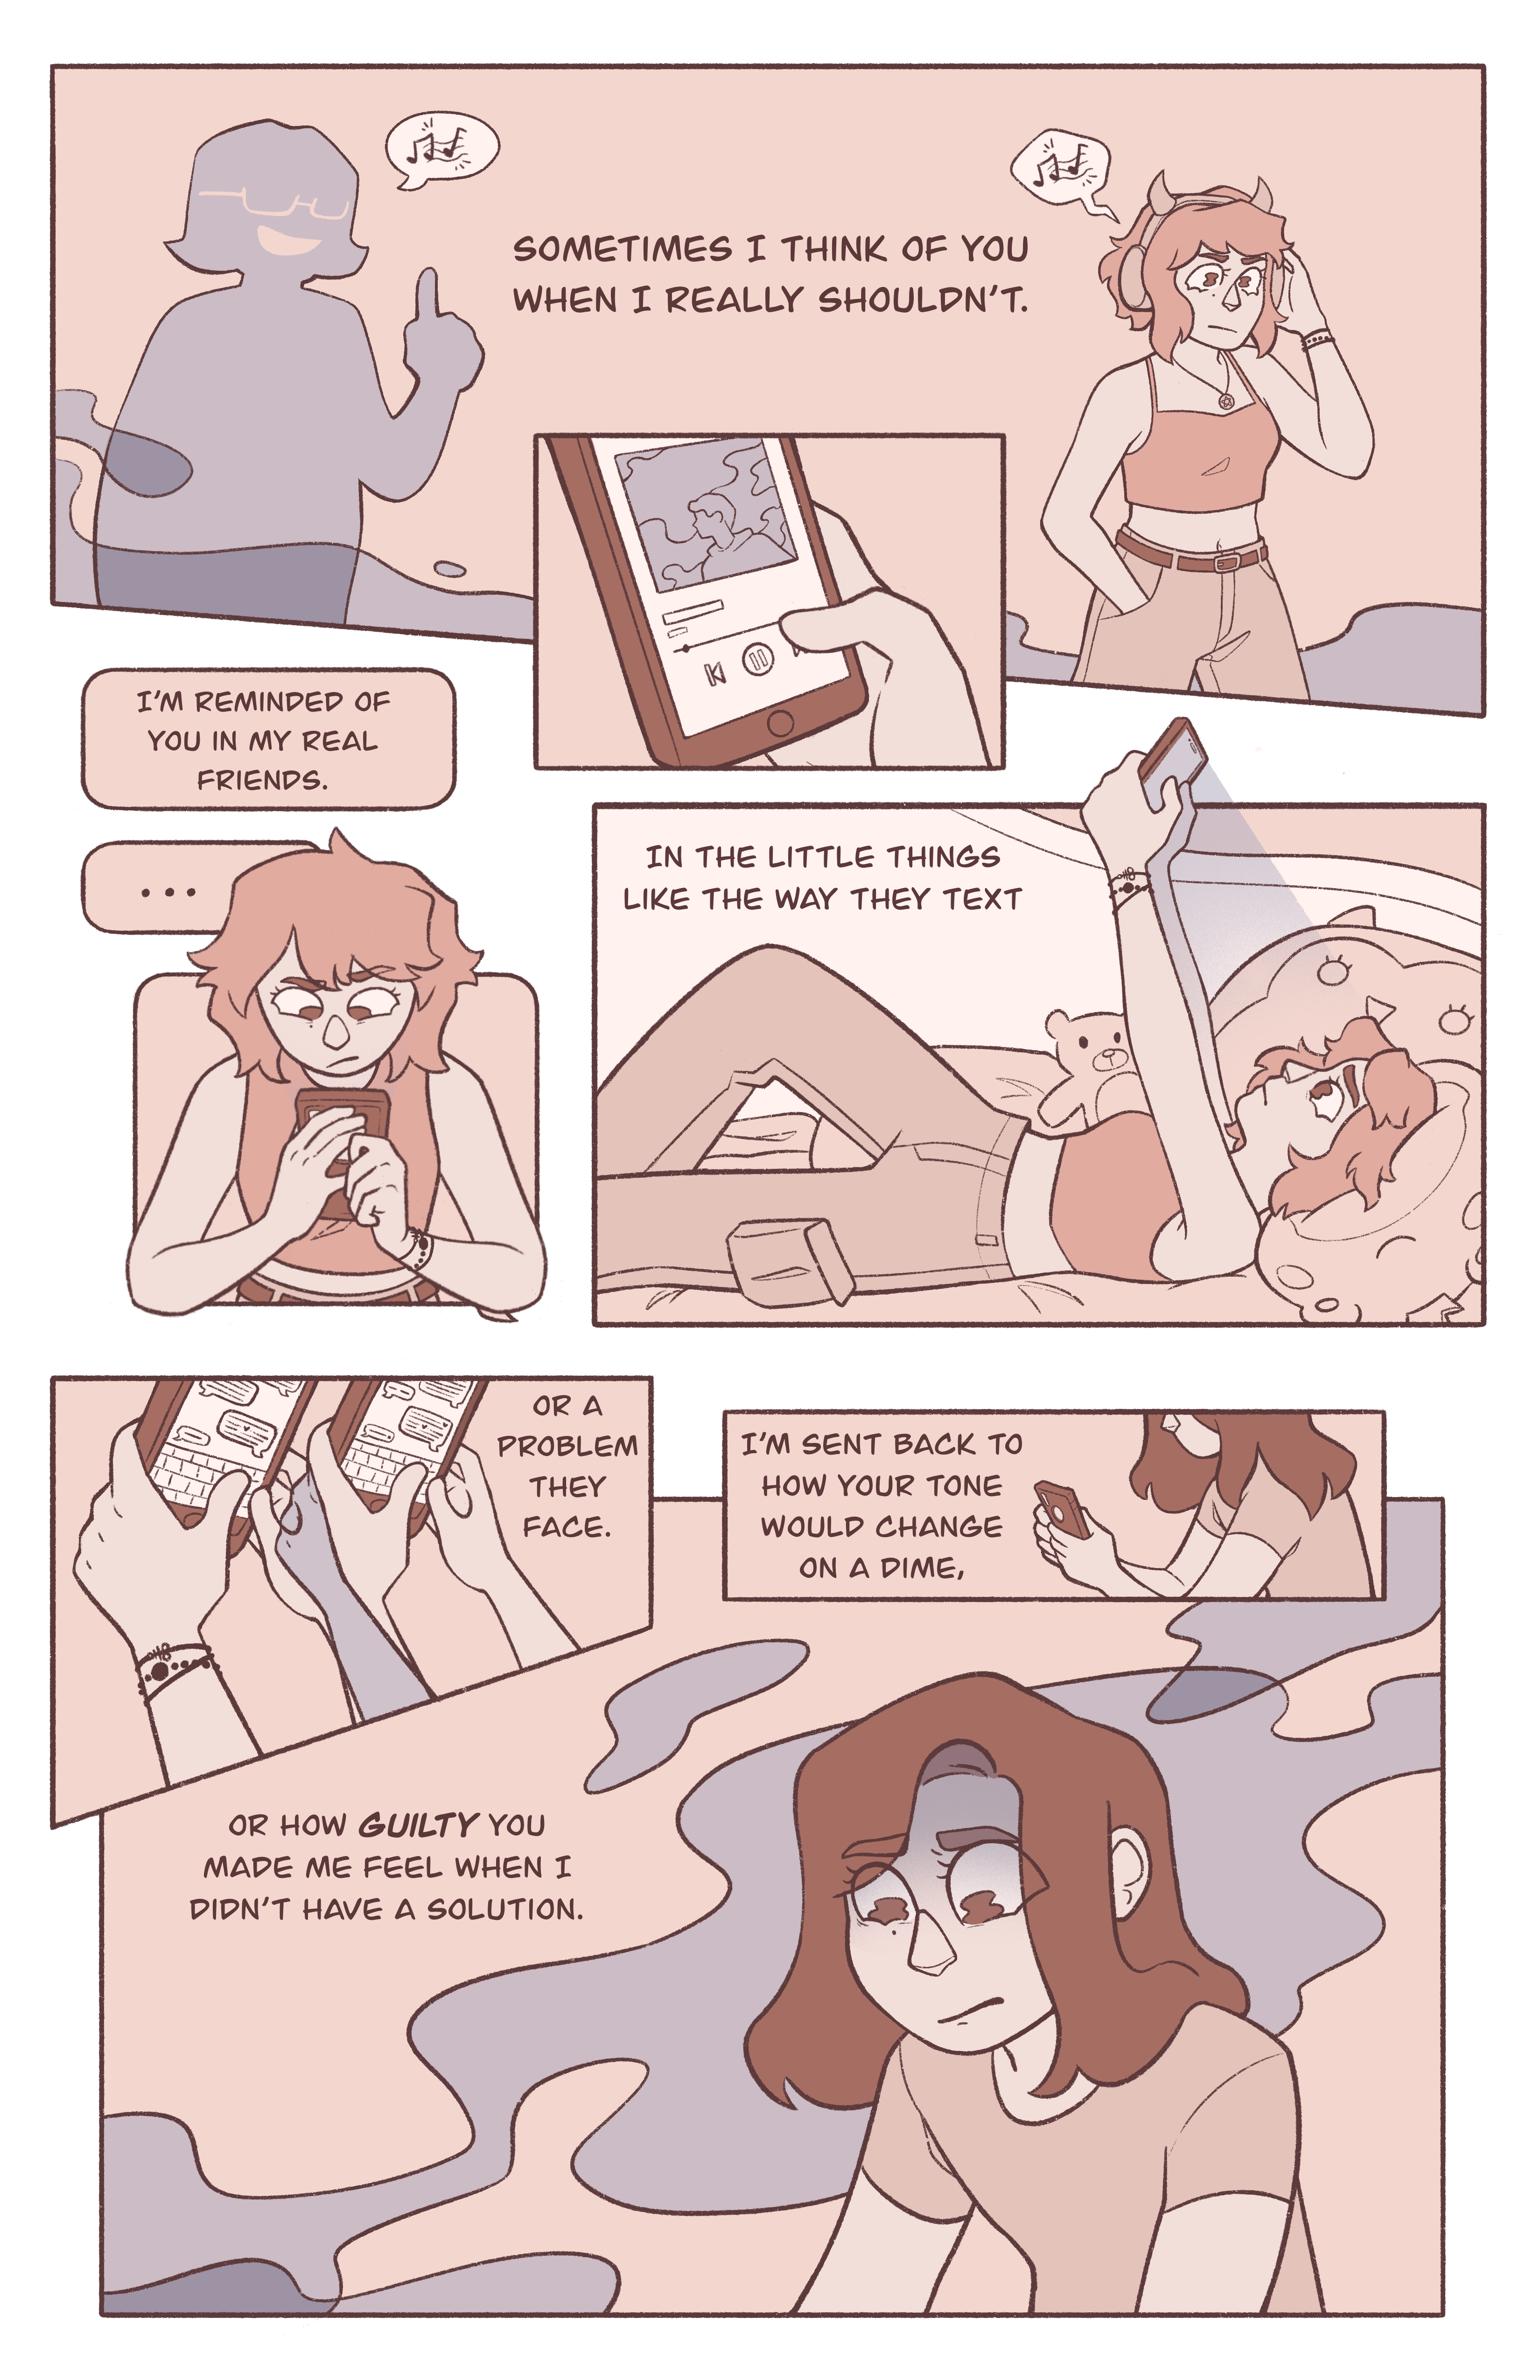 Sometimes I Think of You - Page 1